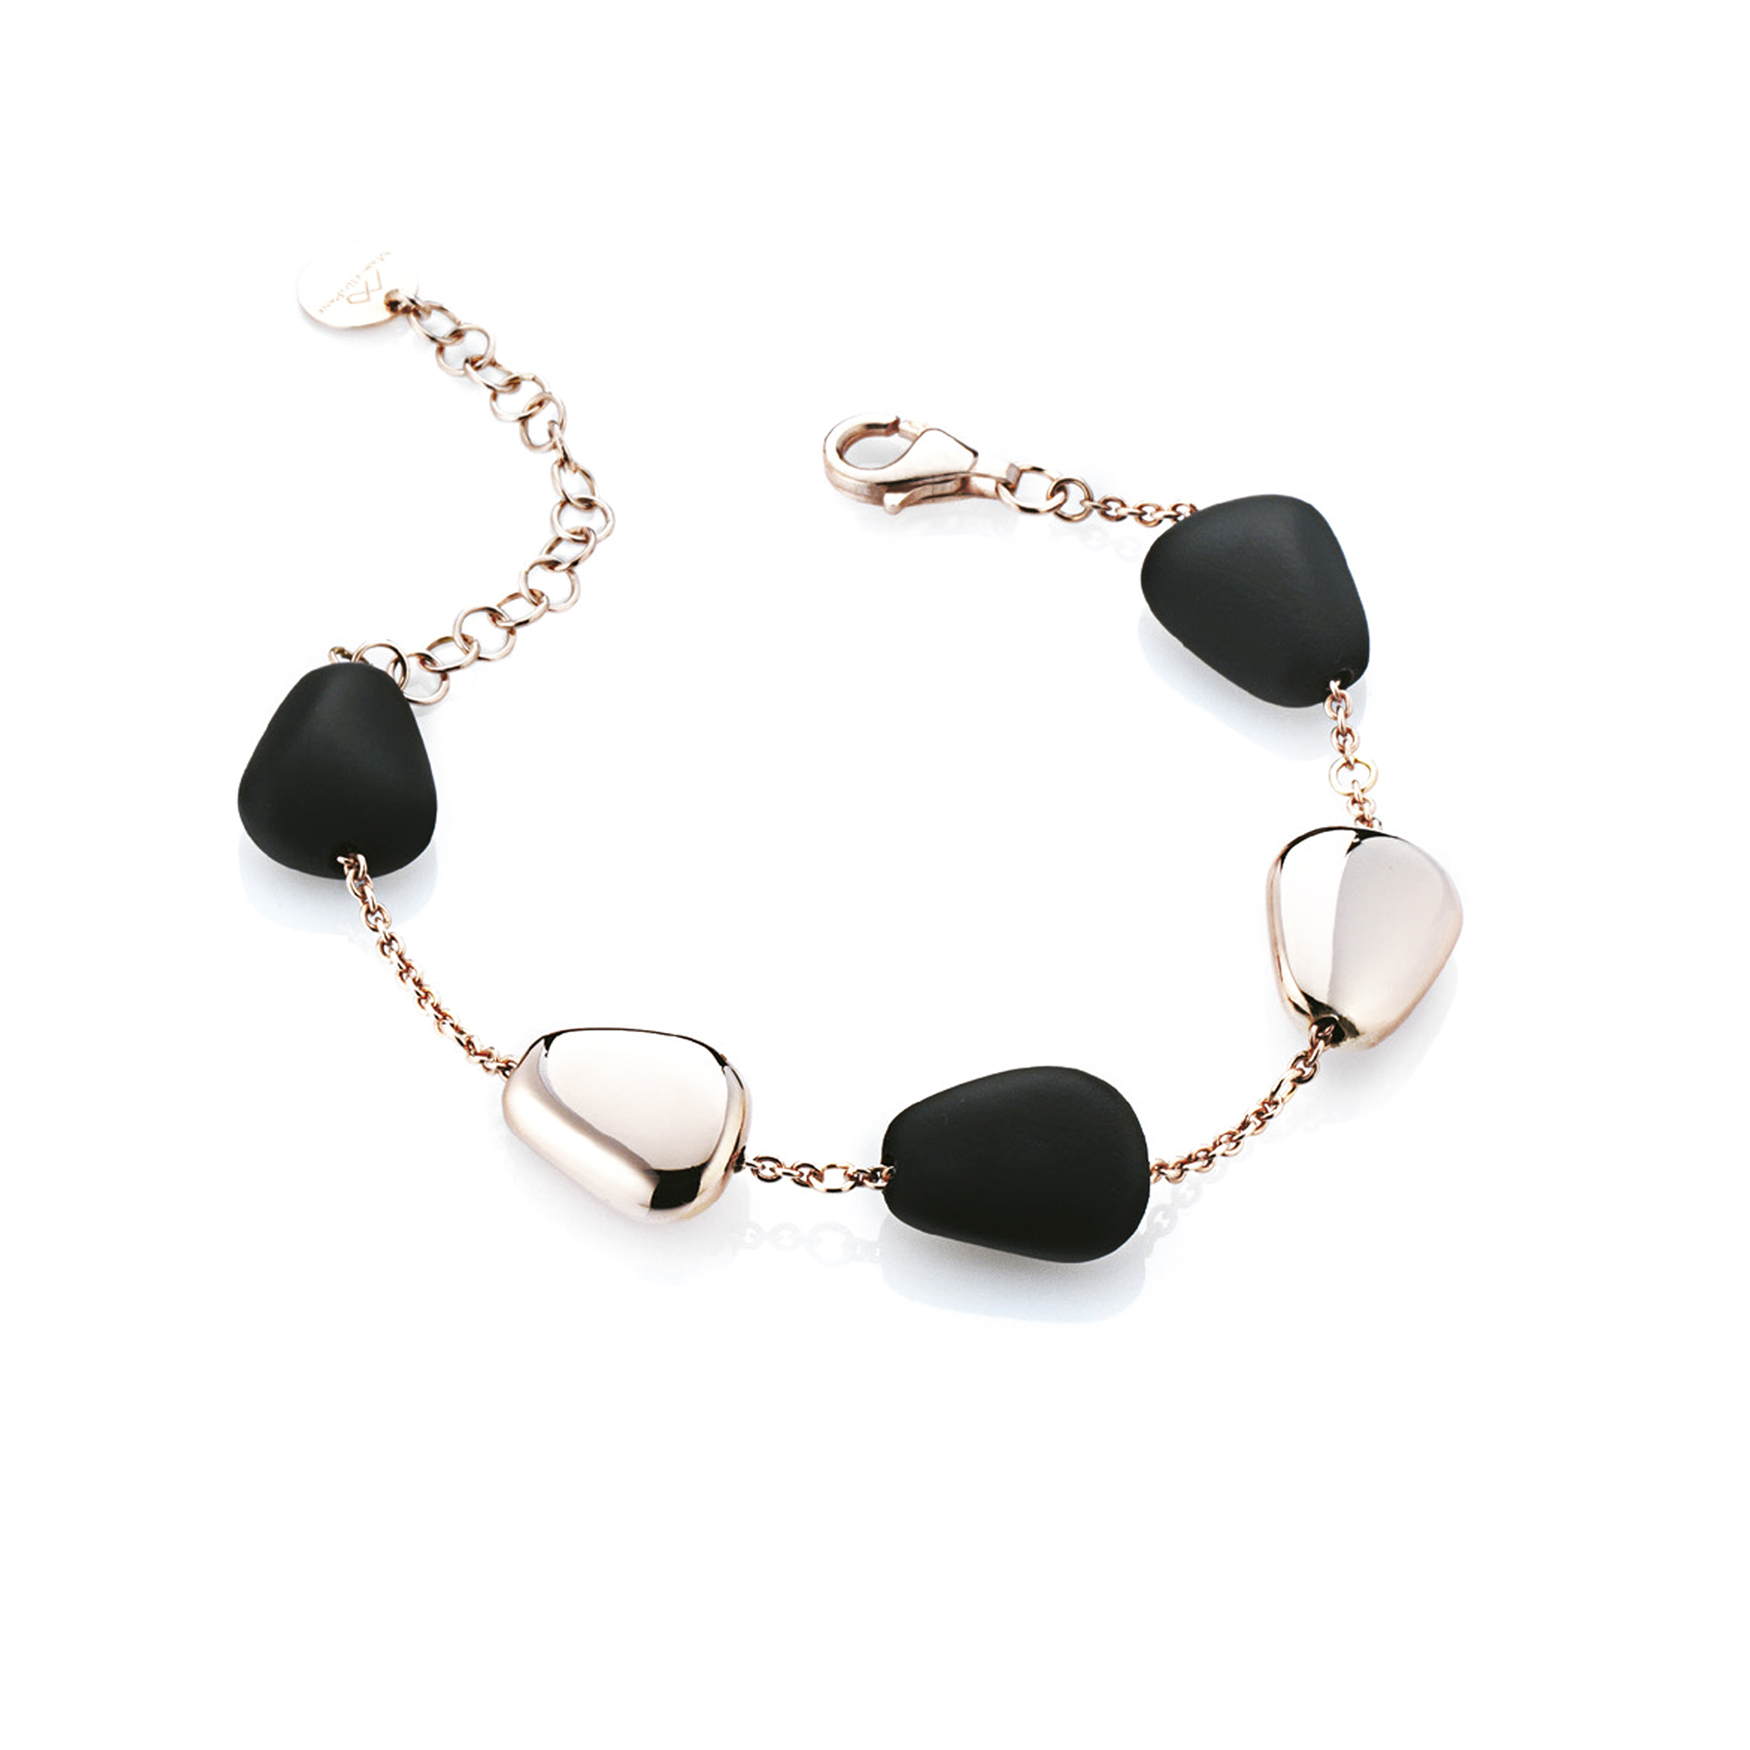 Sensi joyas jewellery Granada silver engagementSILVER BRACELET COVERED WITH  ROSE GOLD AND RUBBER